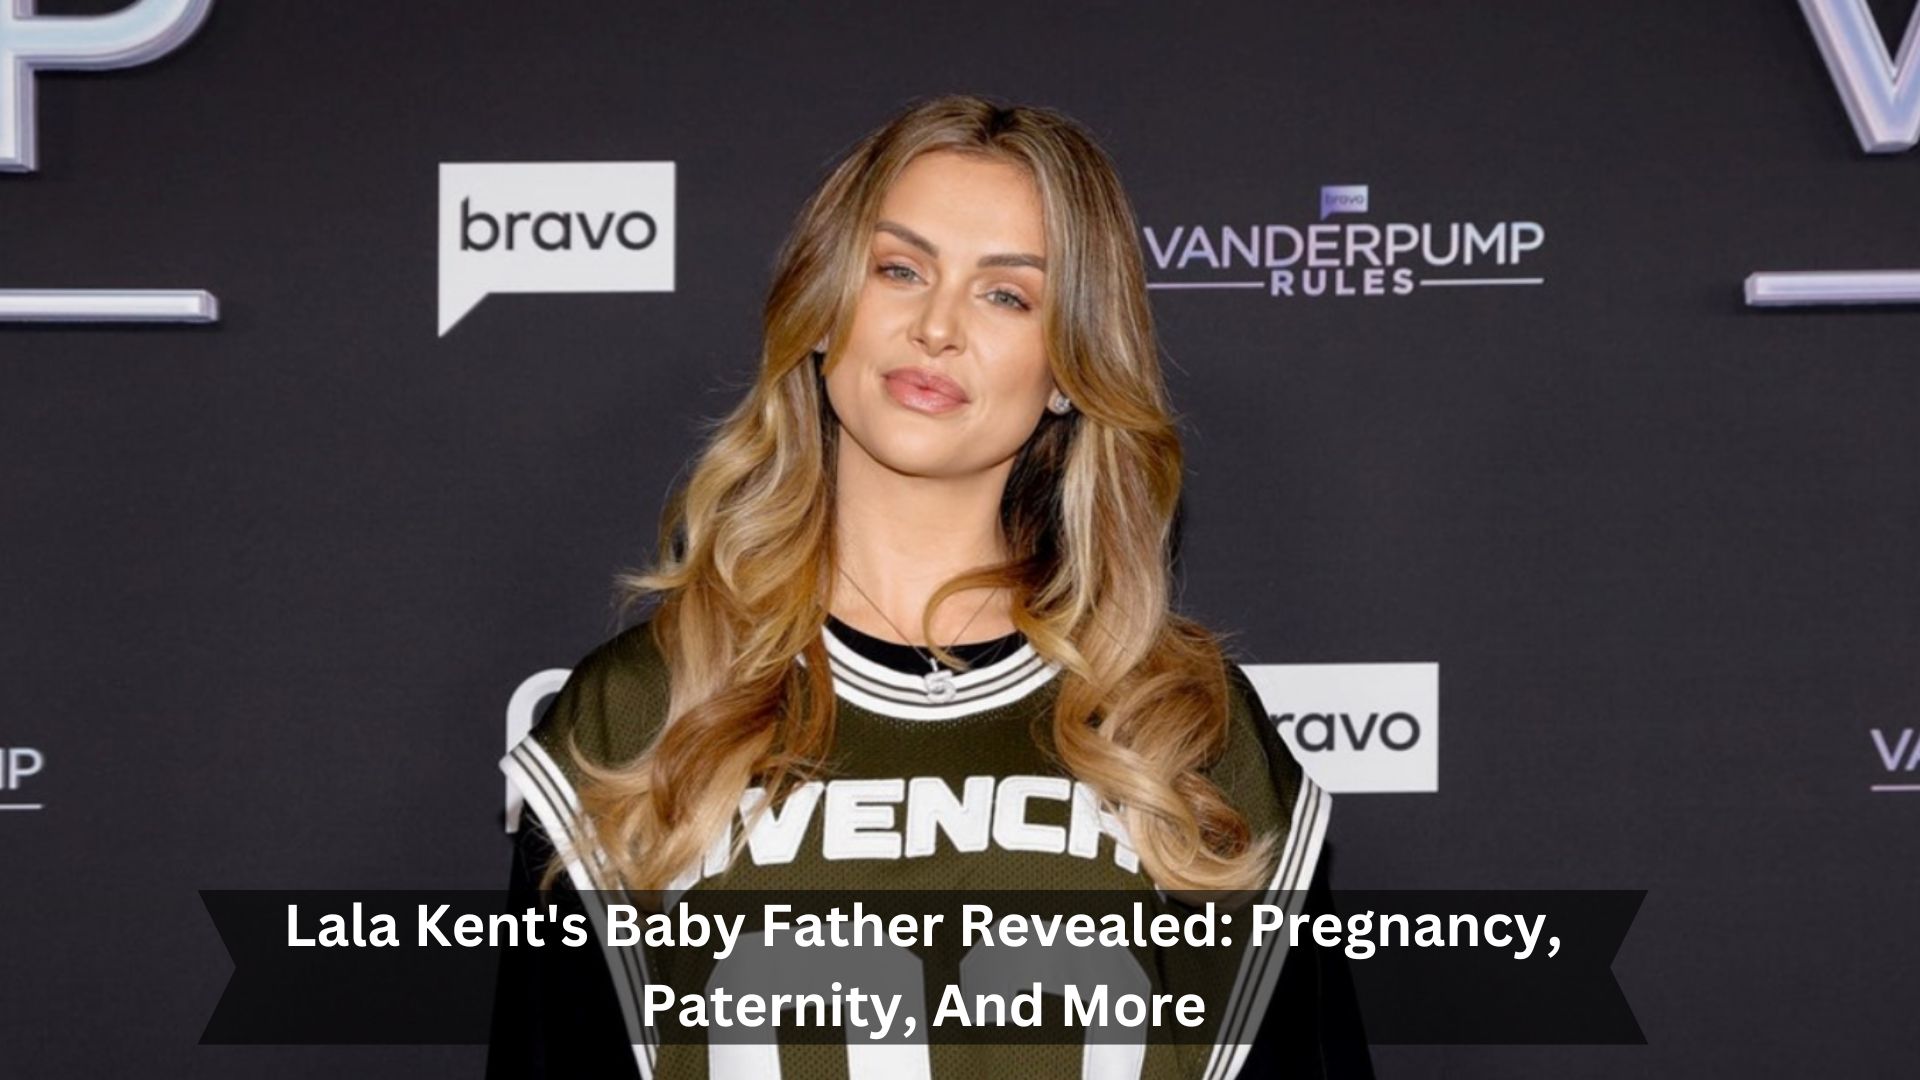 Lala-Kents-Baby-Father-Revealed-Pregnancy-Paternity-And-More